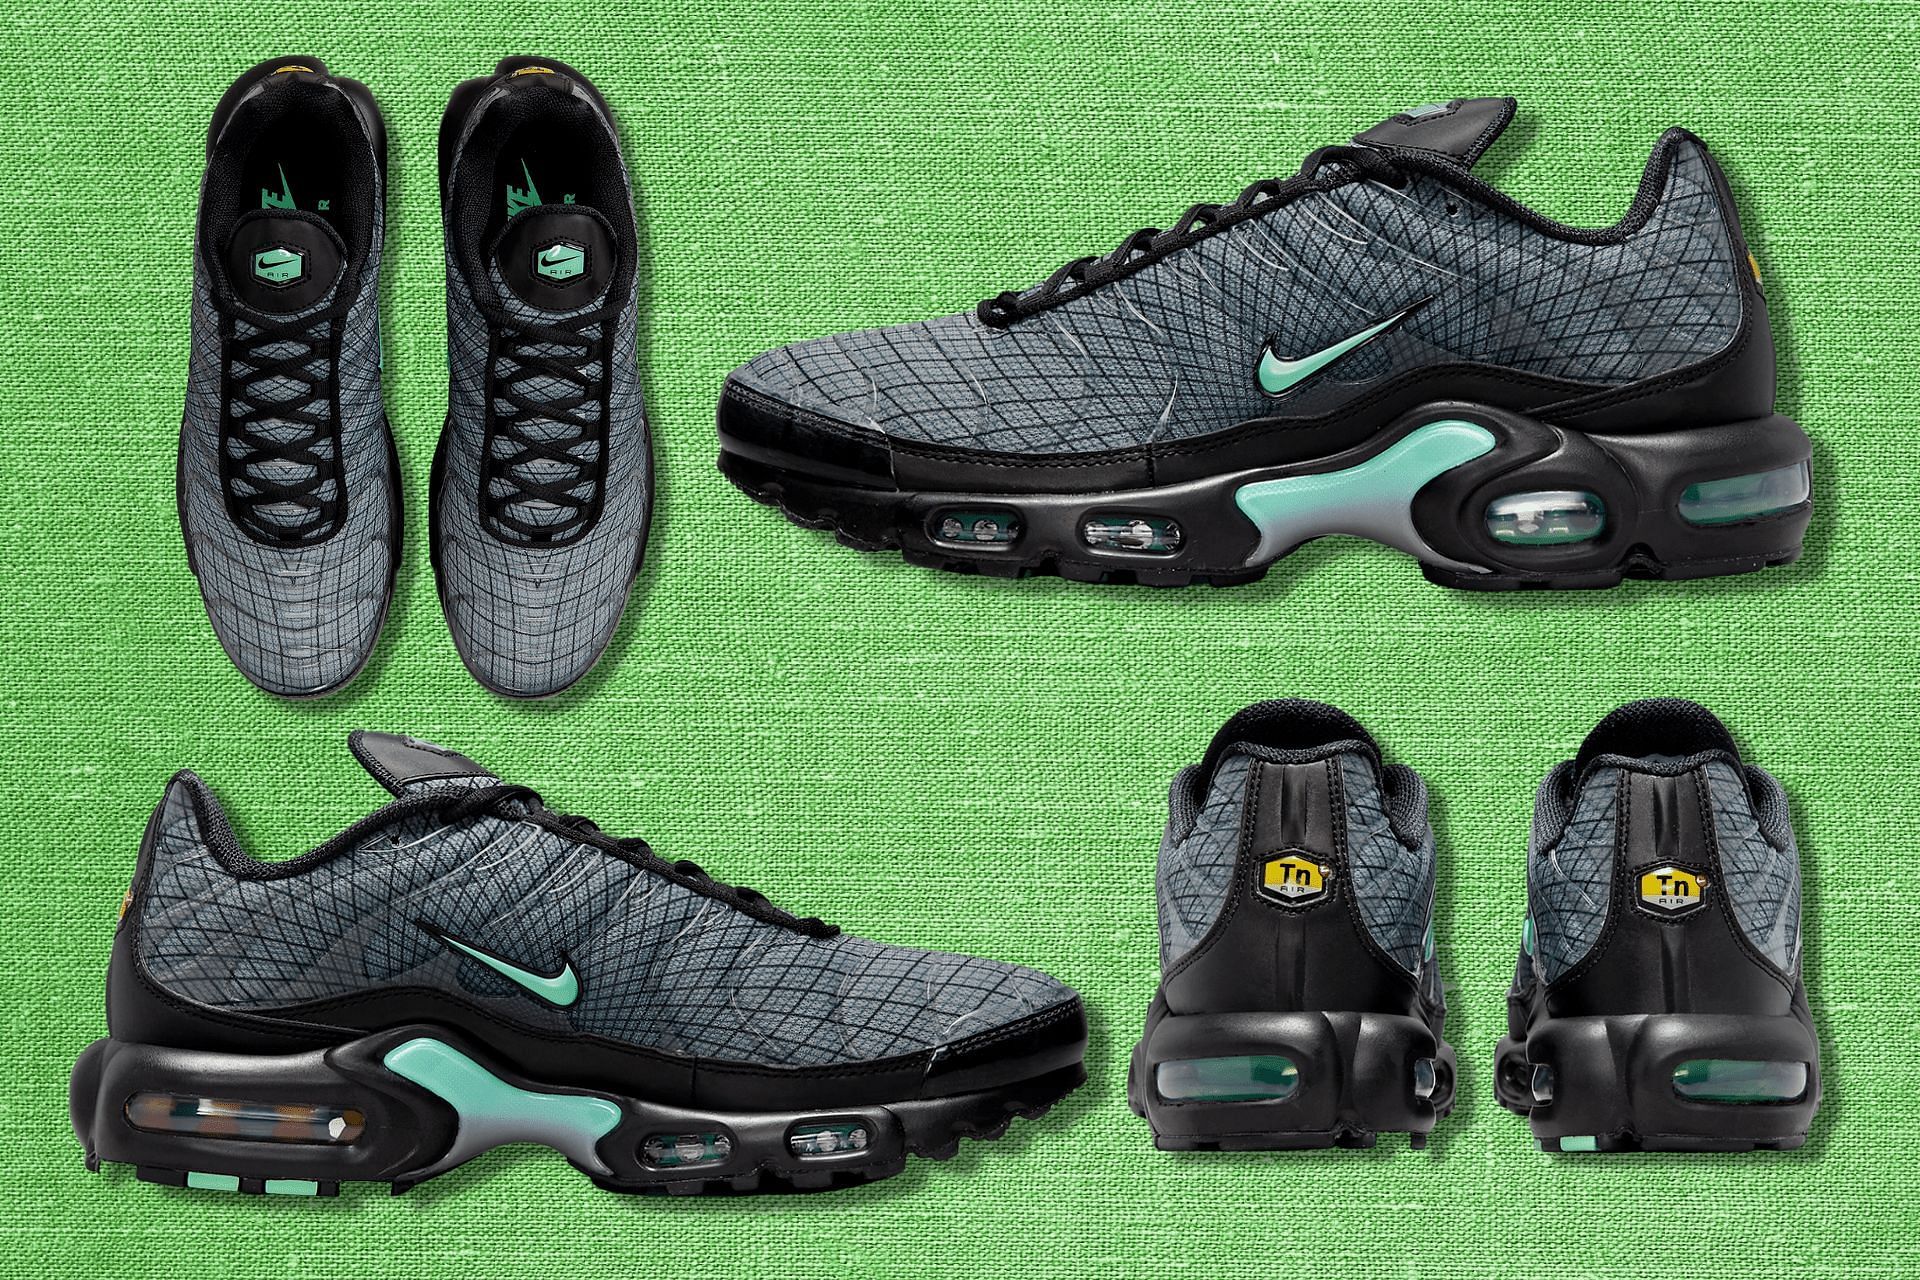 Upcoming Nike Air Max Plus Black Turquoise sneakers reminiscent of the Tiffany blue hues (Image via Sportskeeda)